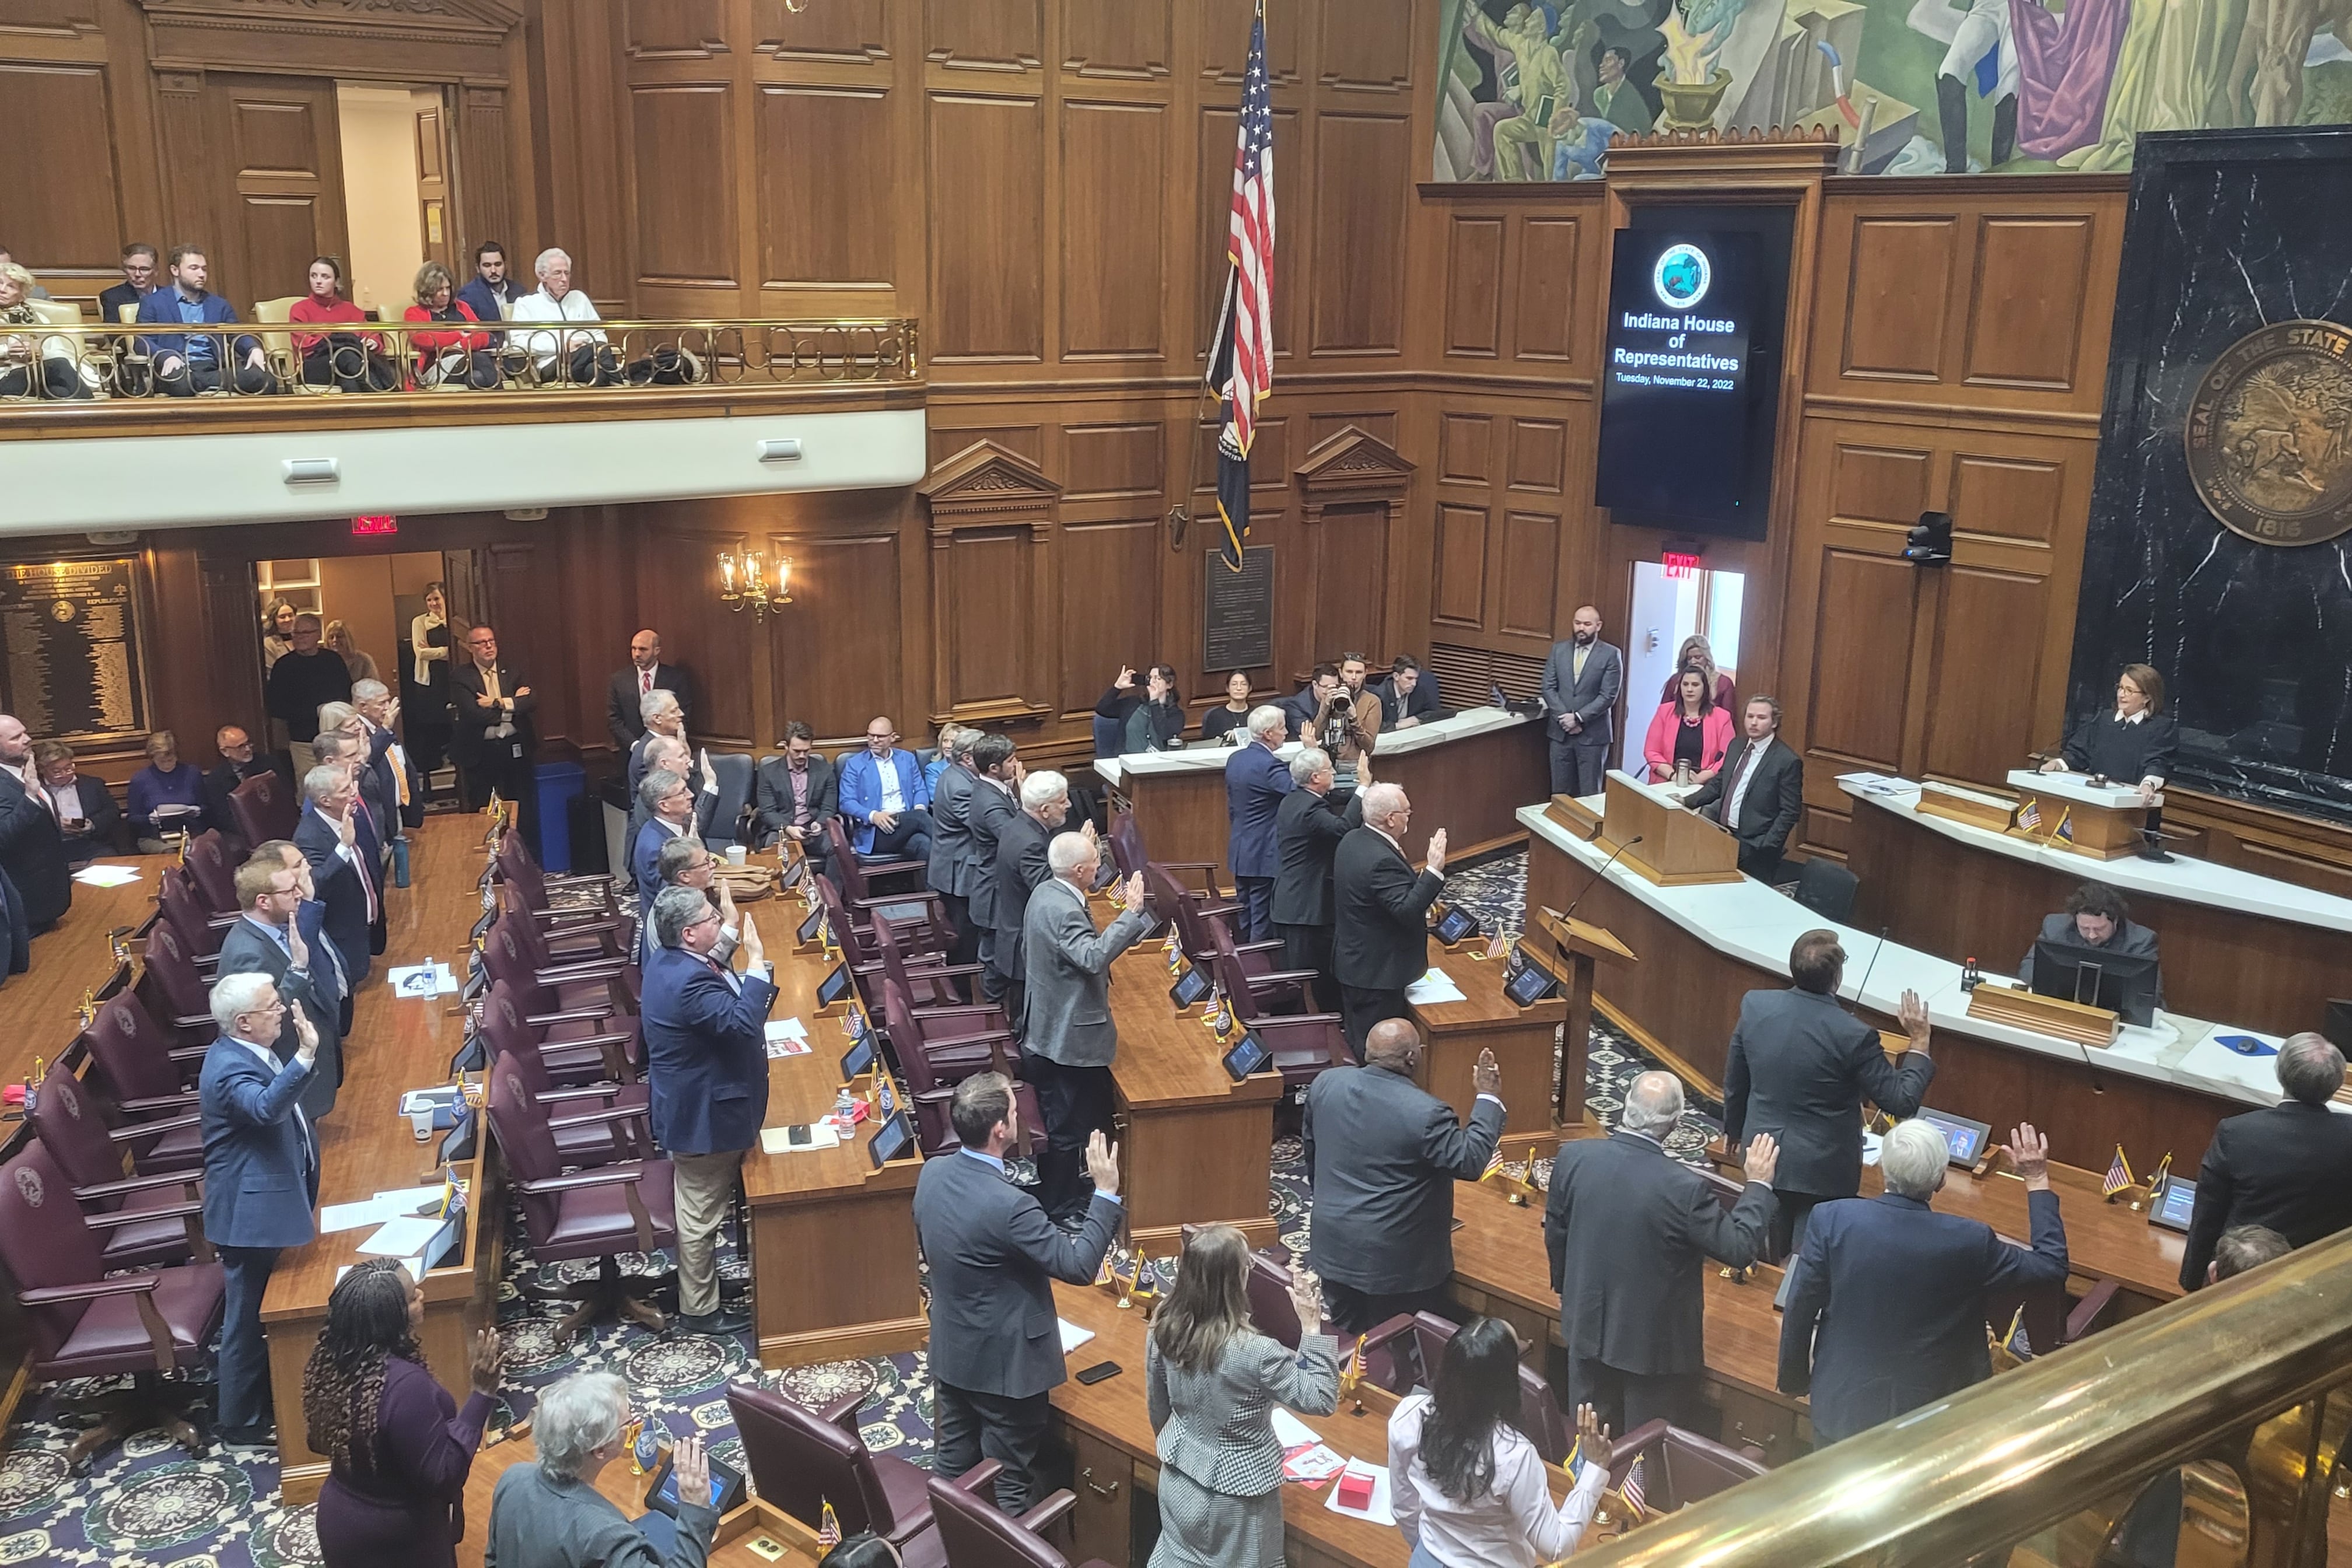 Indiana House lawmakers mark the ceremonial start of session, Organization Day, on Nov. 22, 2022.